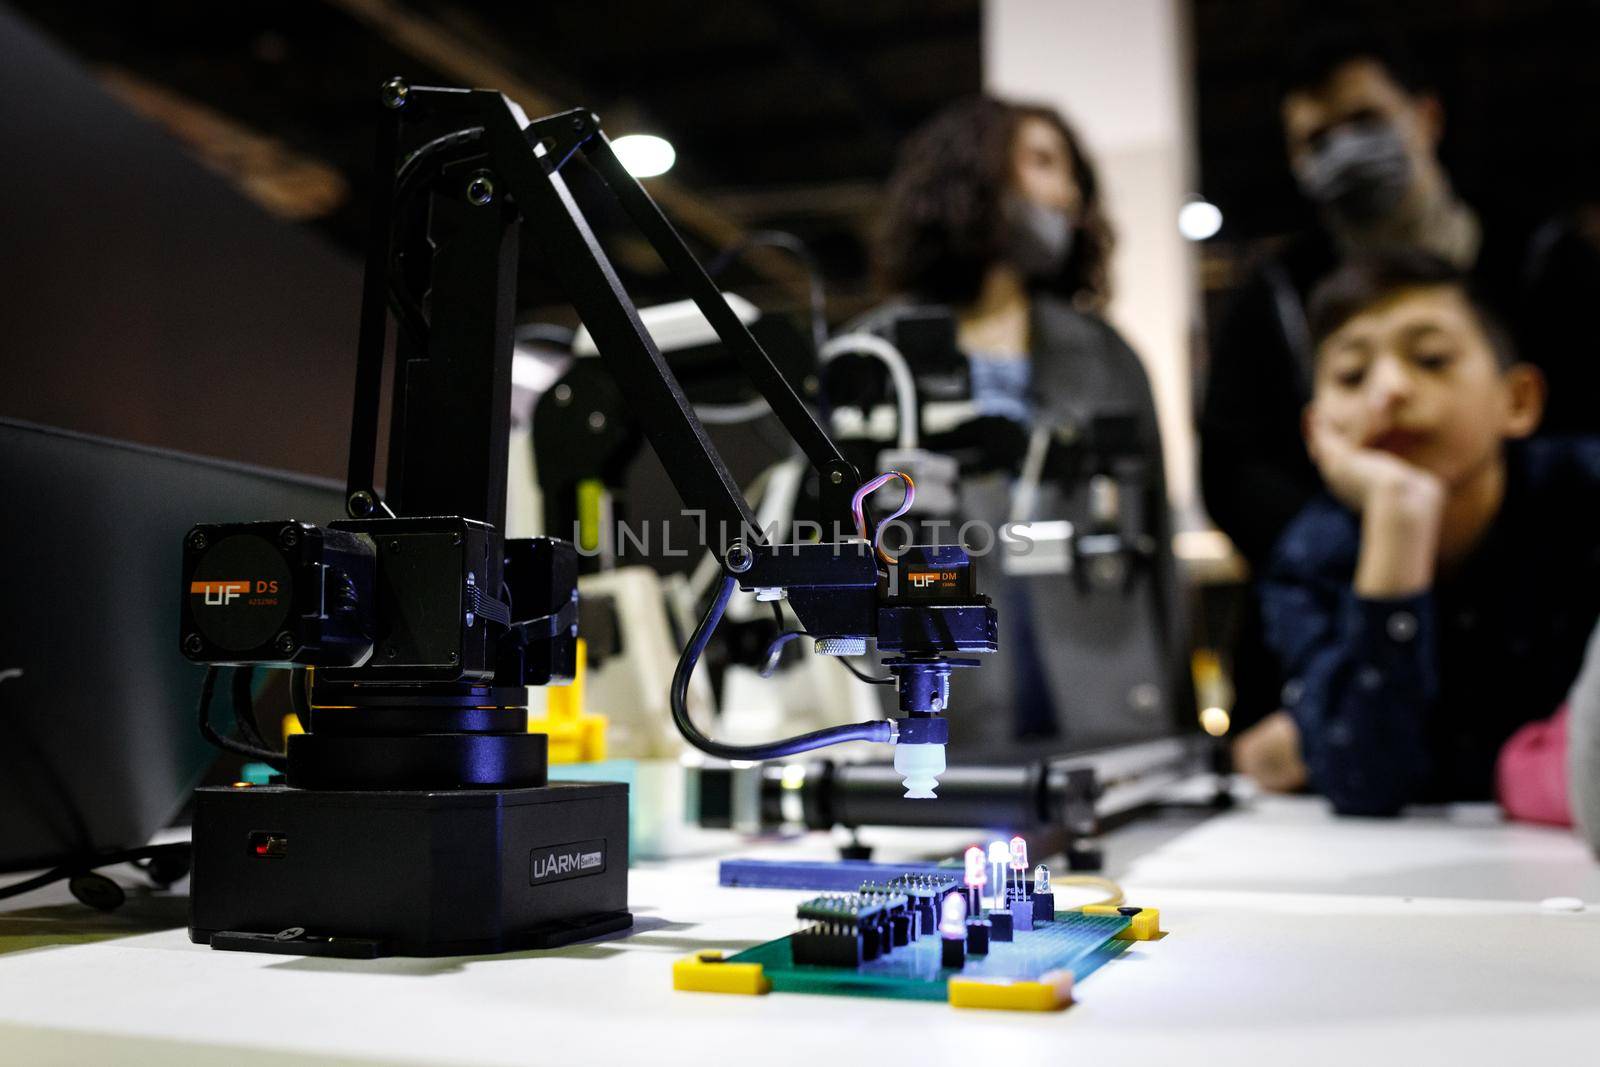 Conveyor-type robot mounting chips at the exhibition stand of the robot festival. Almaty, Kazakhstan - February 19, 2022